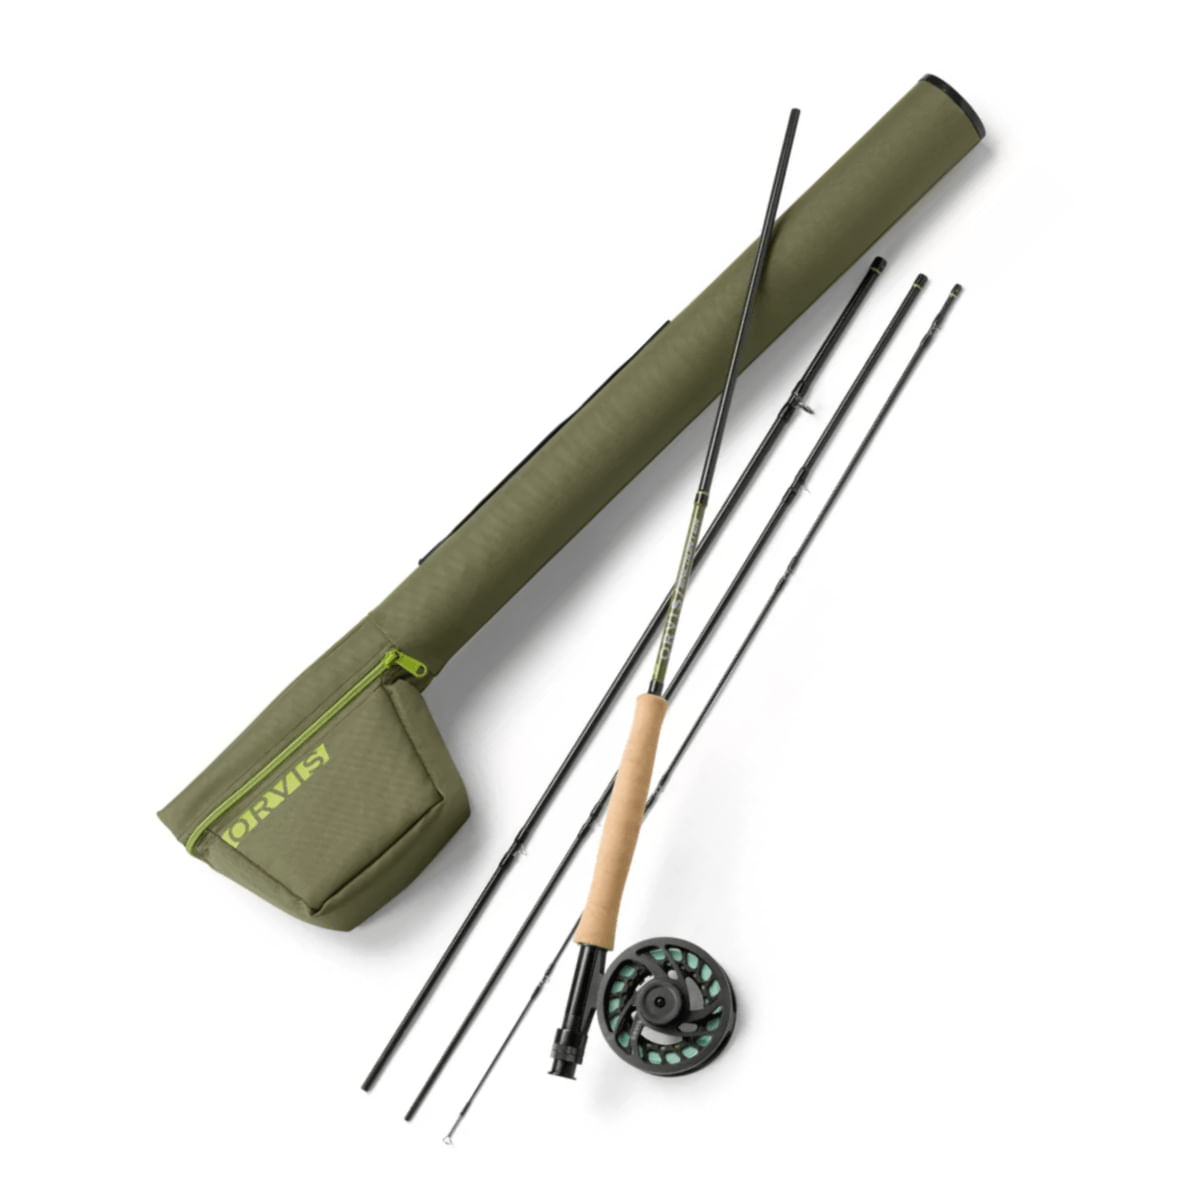 https://alssports.vtexassets.com/arquivos/ids/1040337/Orvis-Encounter-Fly-Rod-Boxed-Outfit.jpg?v=637846802548930000